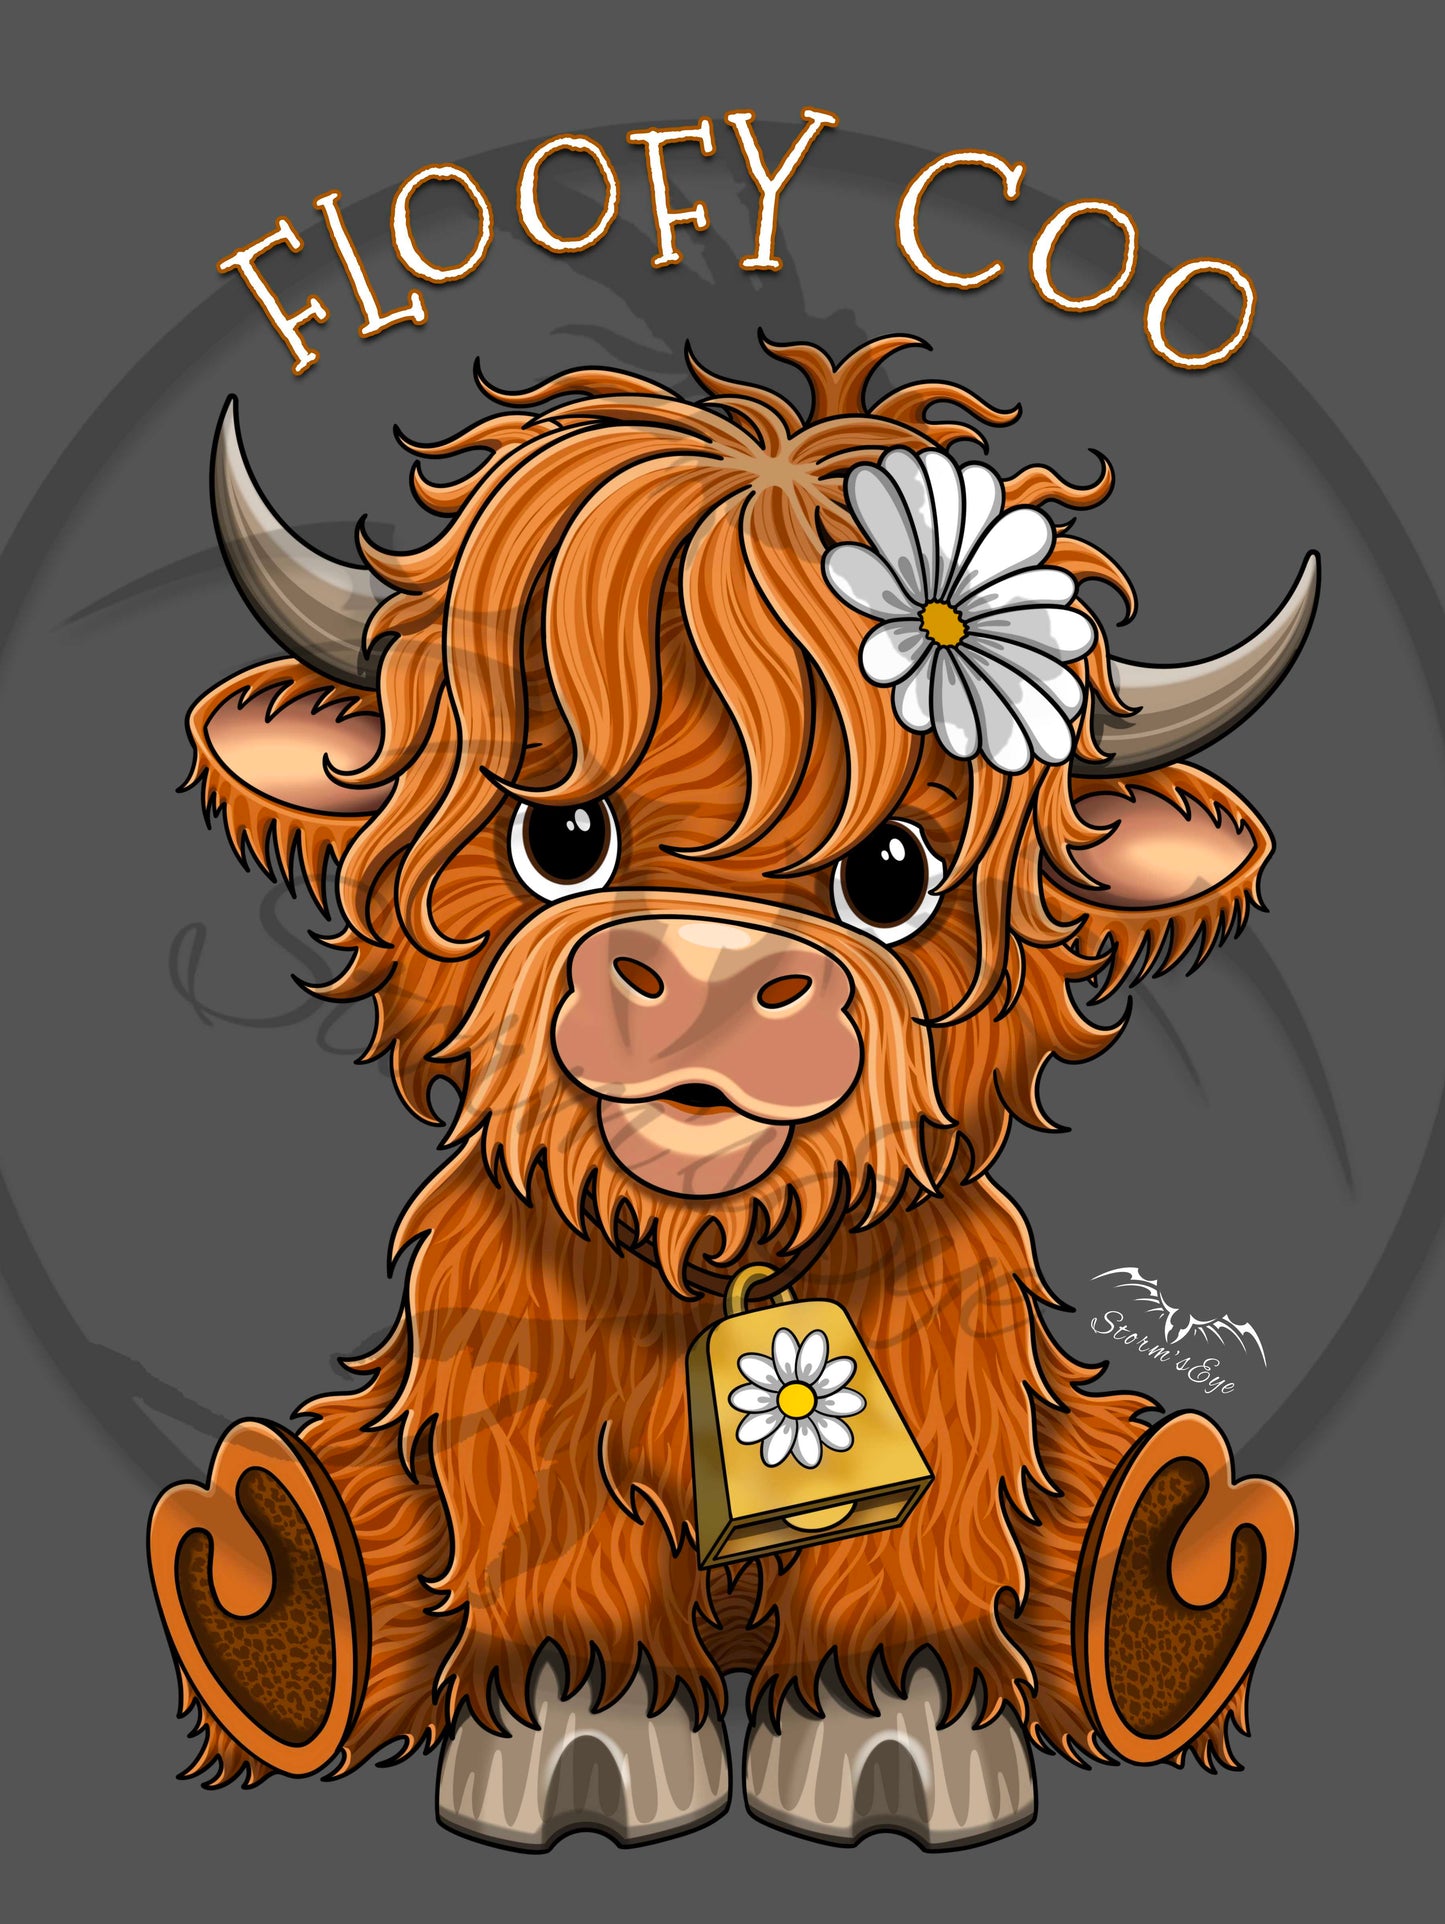 floofy coo highland cow design by Stormseye Design